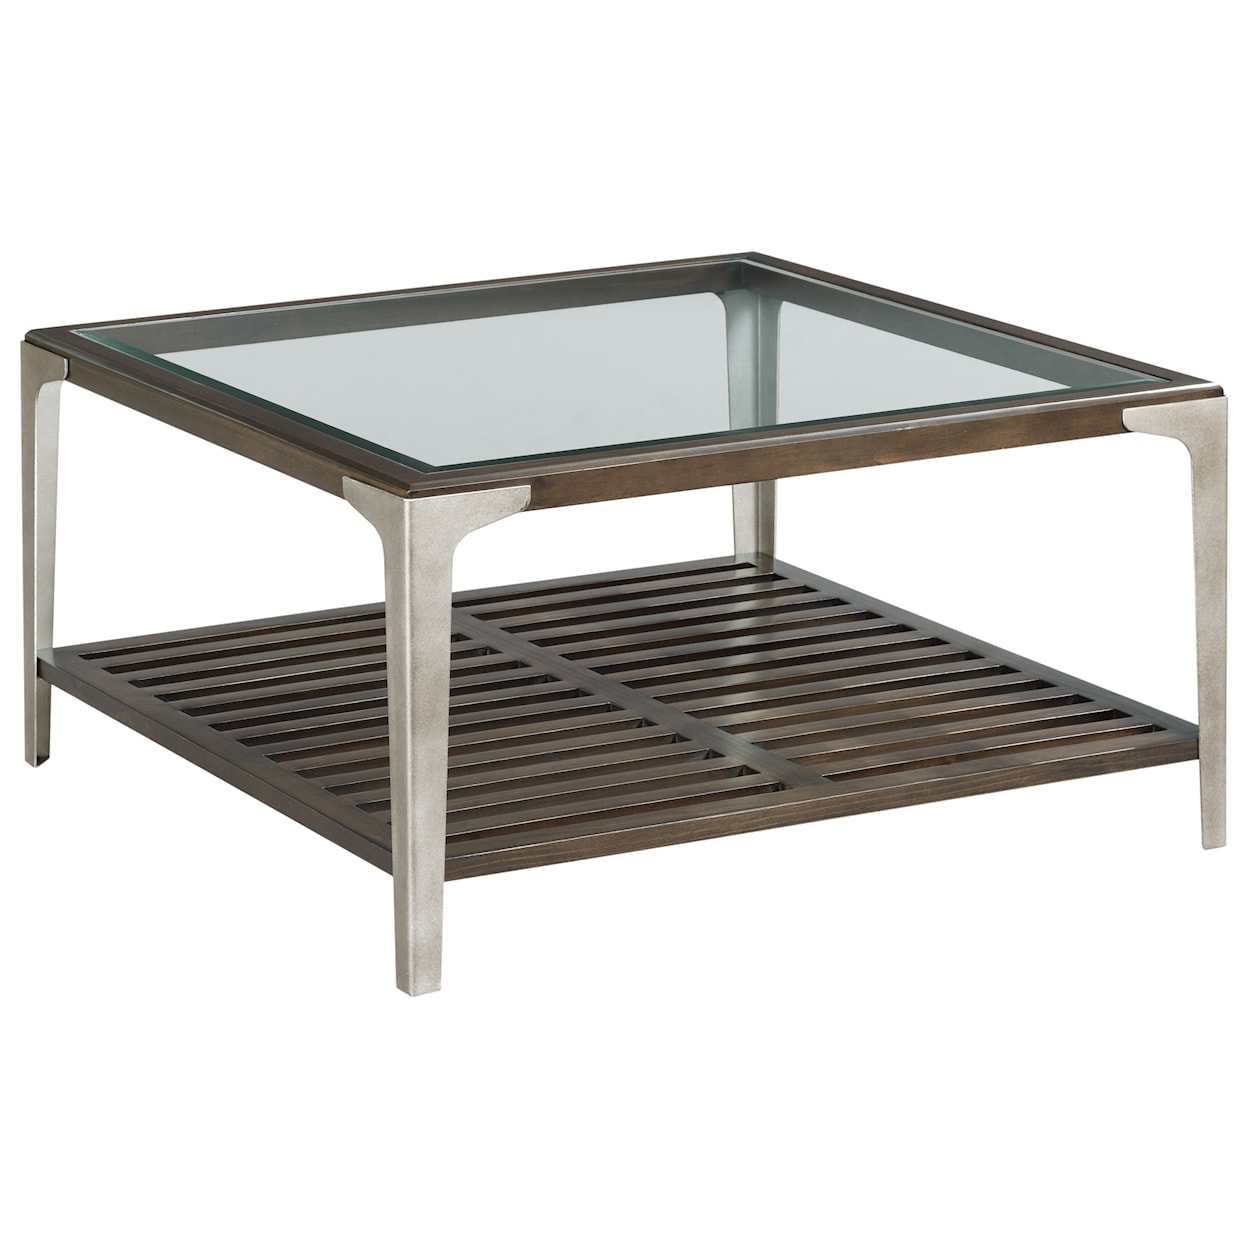 Alexvale Tranquil Square Cocktail Table